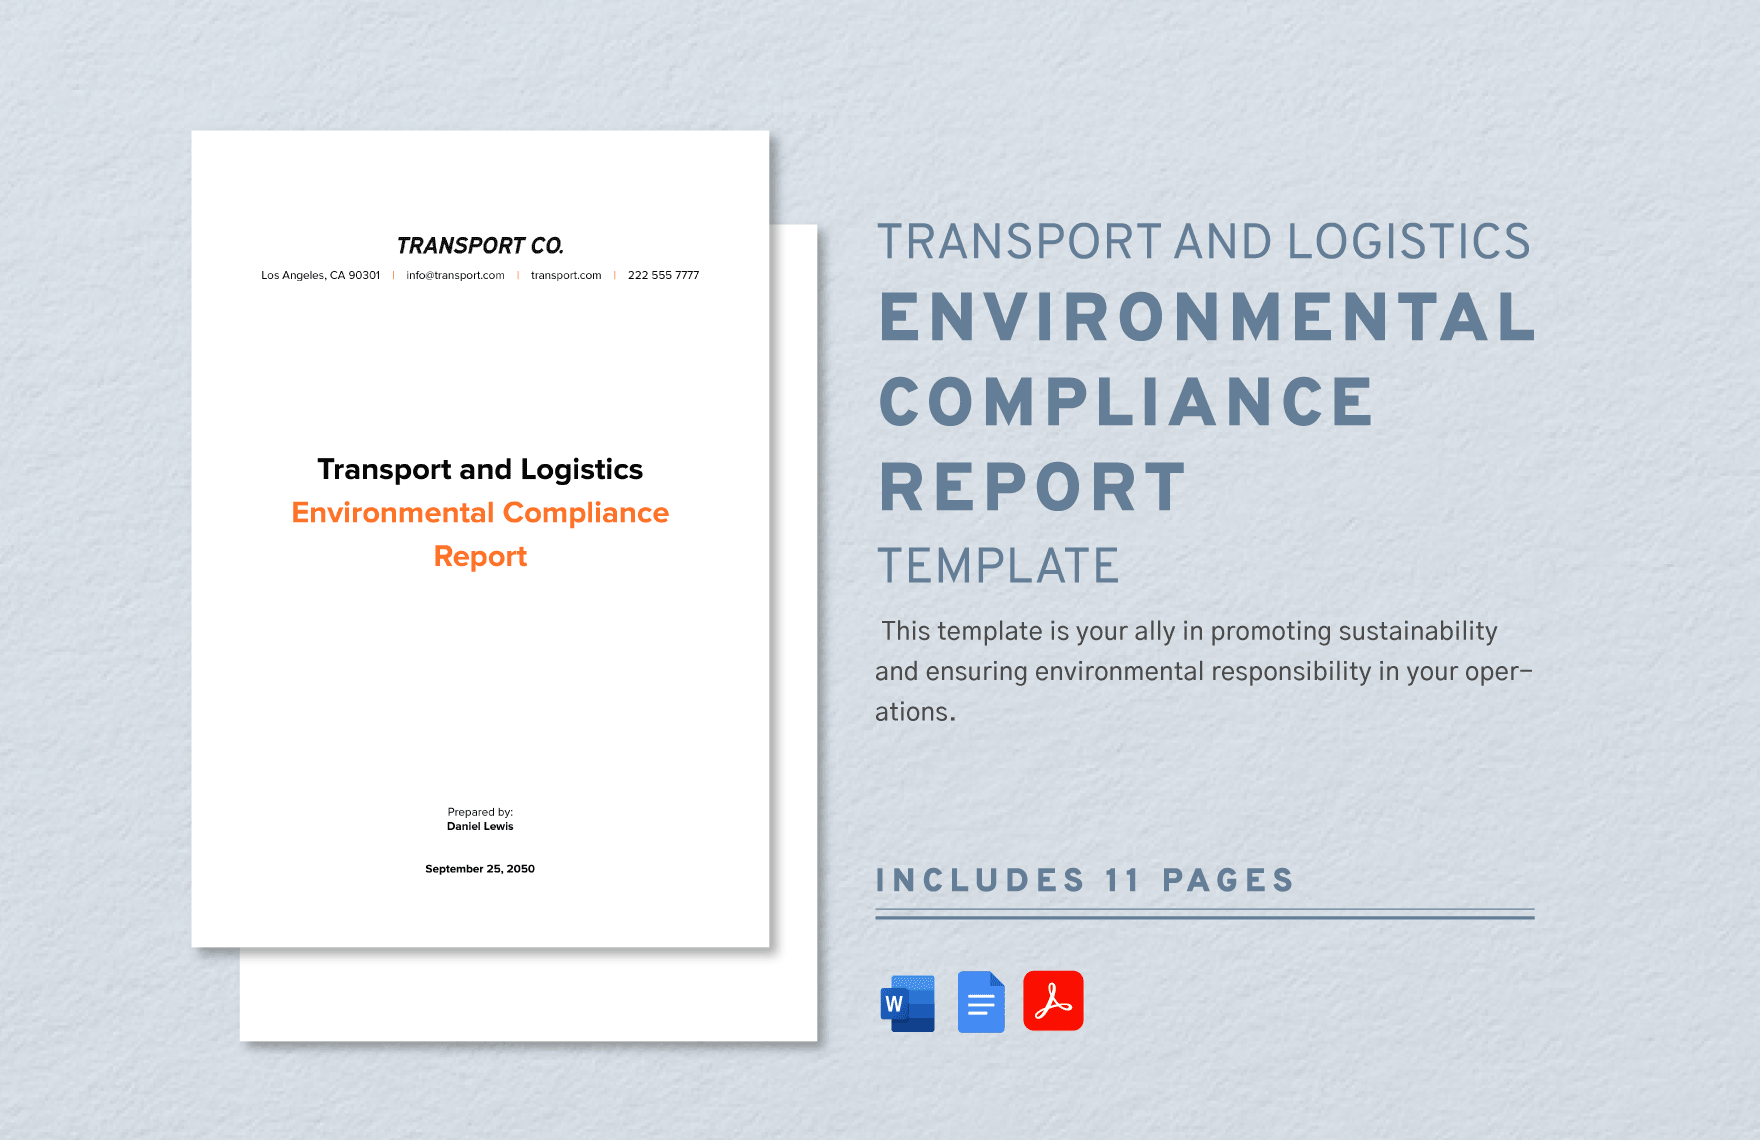 Transport and Logistics Environmental Compliance Report Template